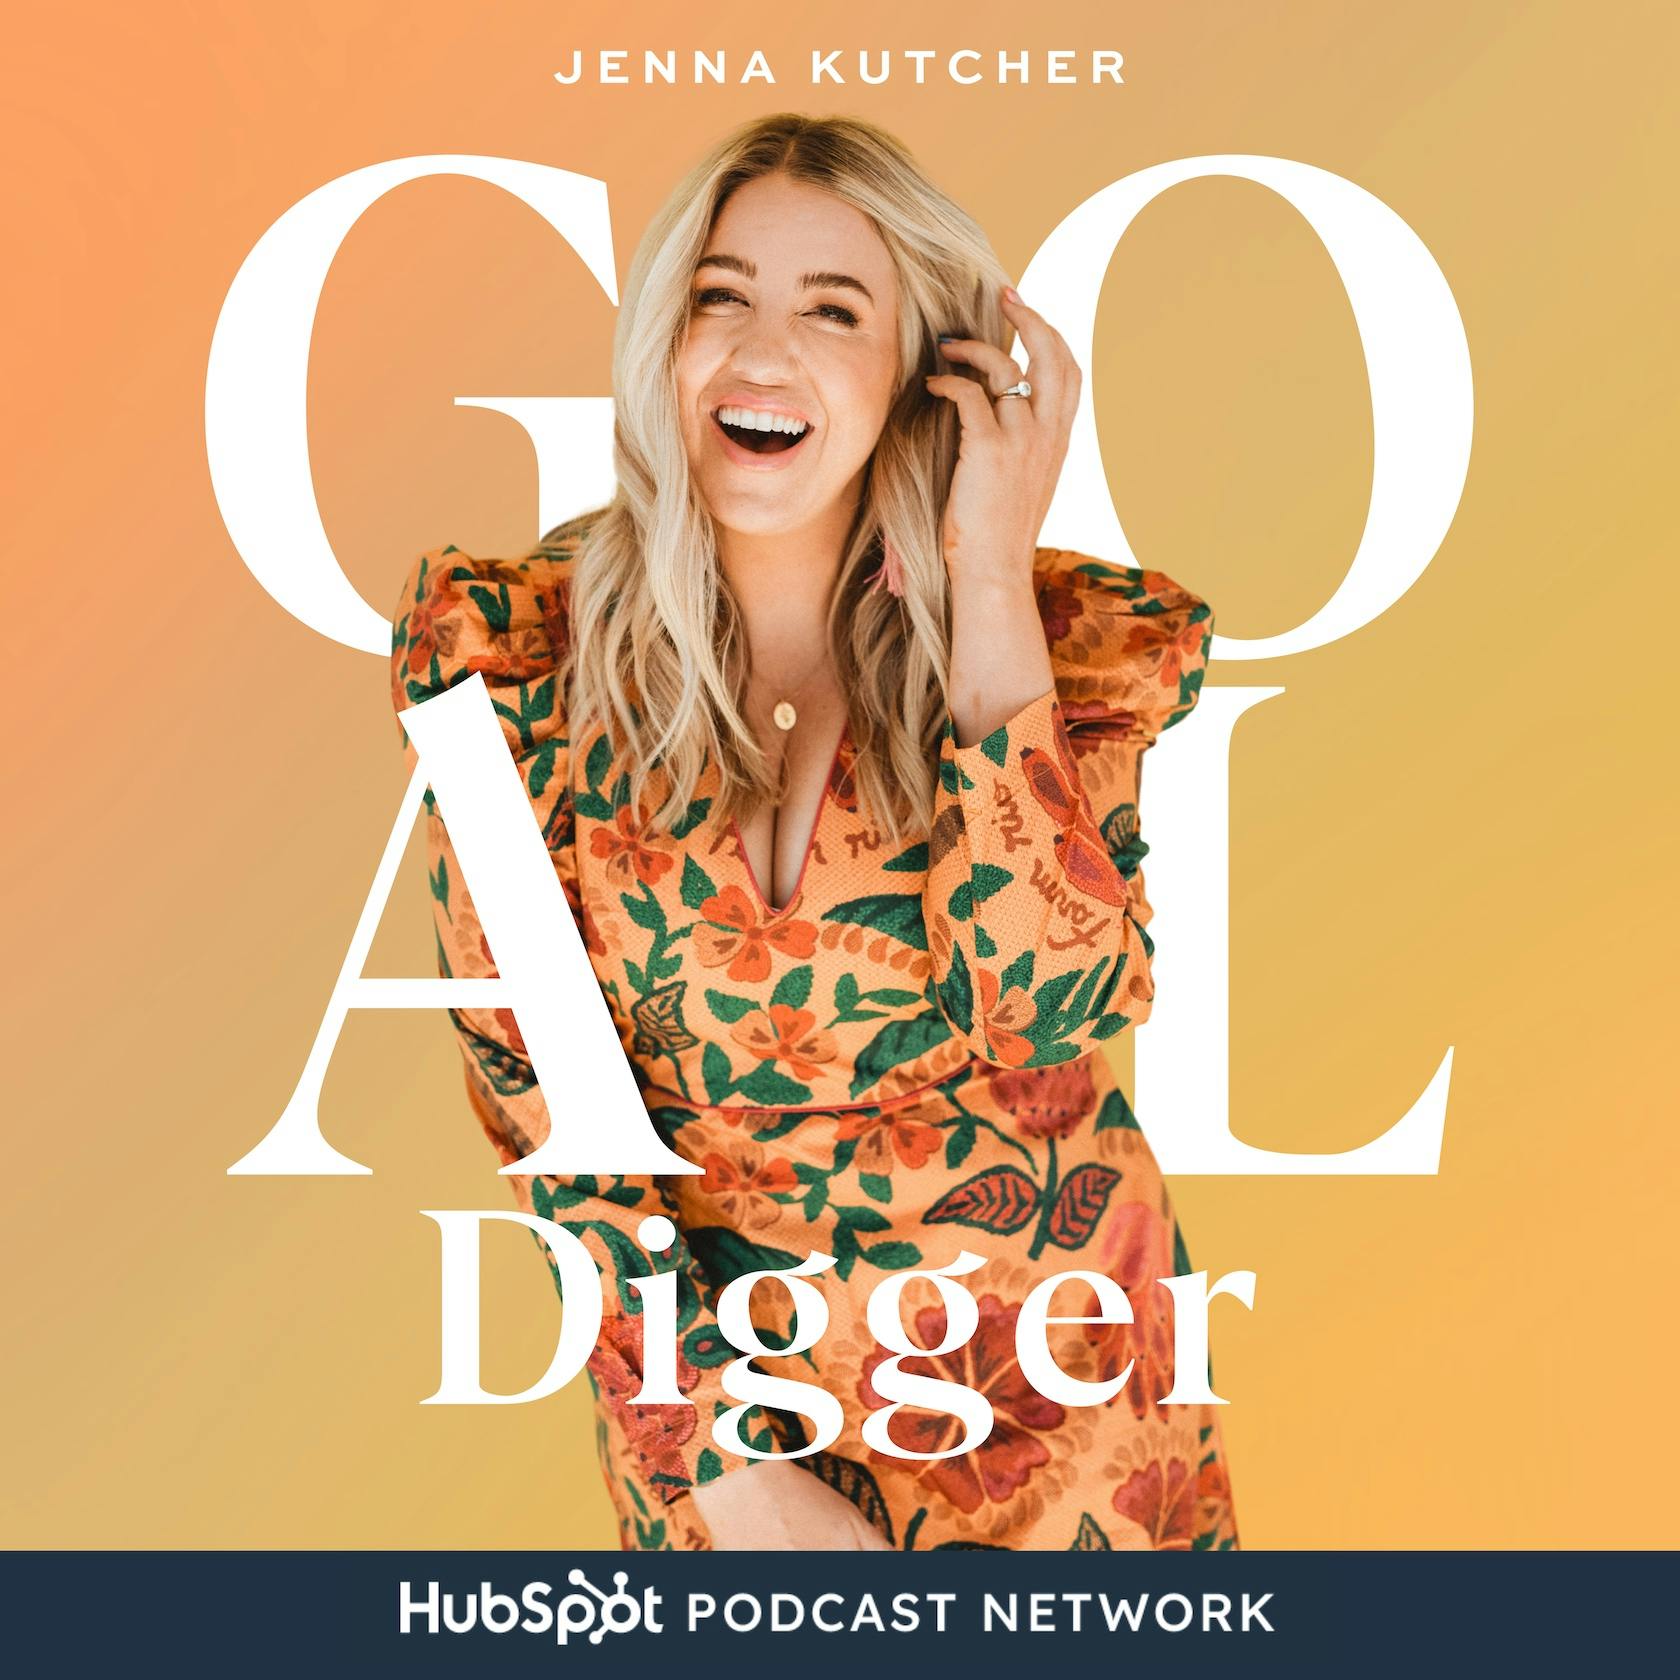 569: Talking The Office, Podcasting, and Writing Books with Jenna Fischer